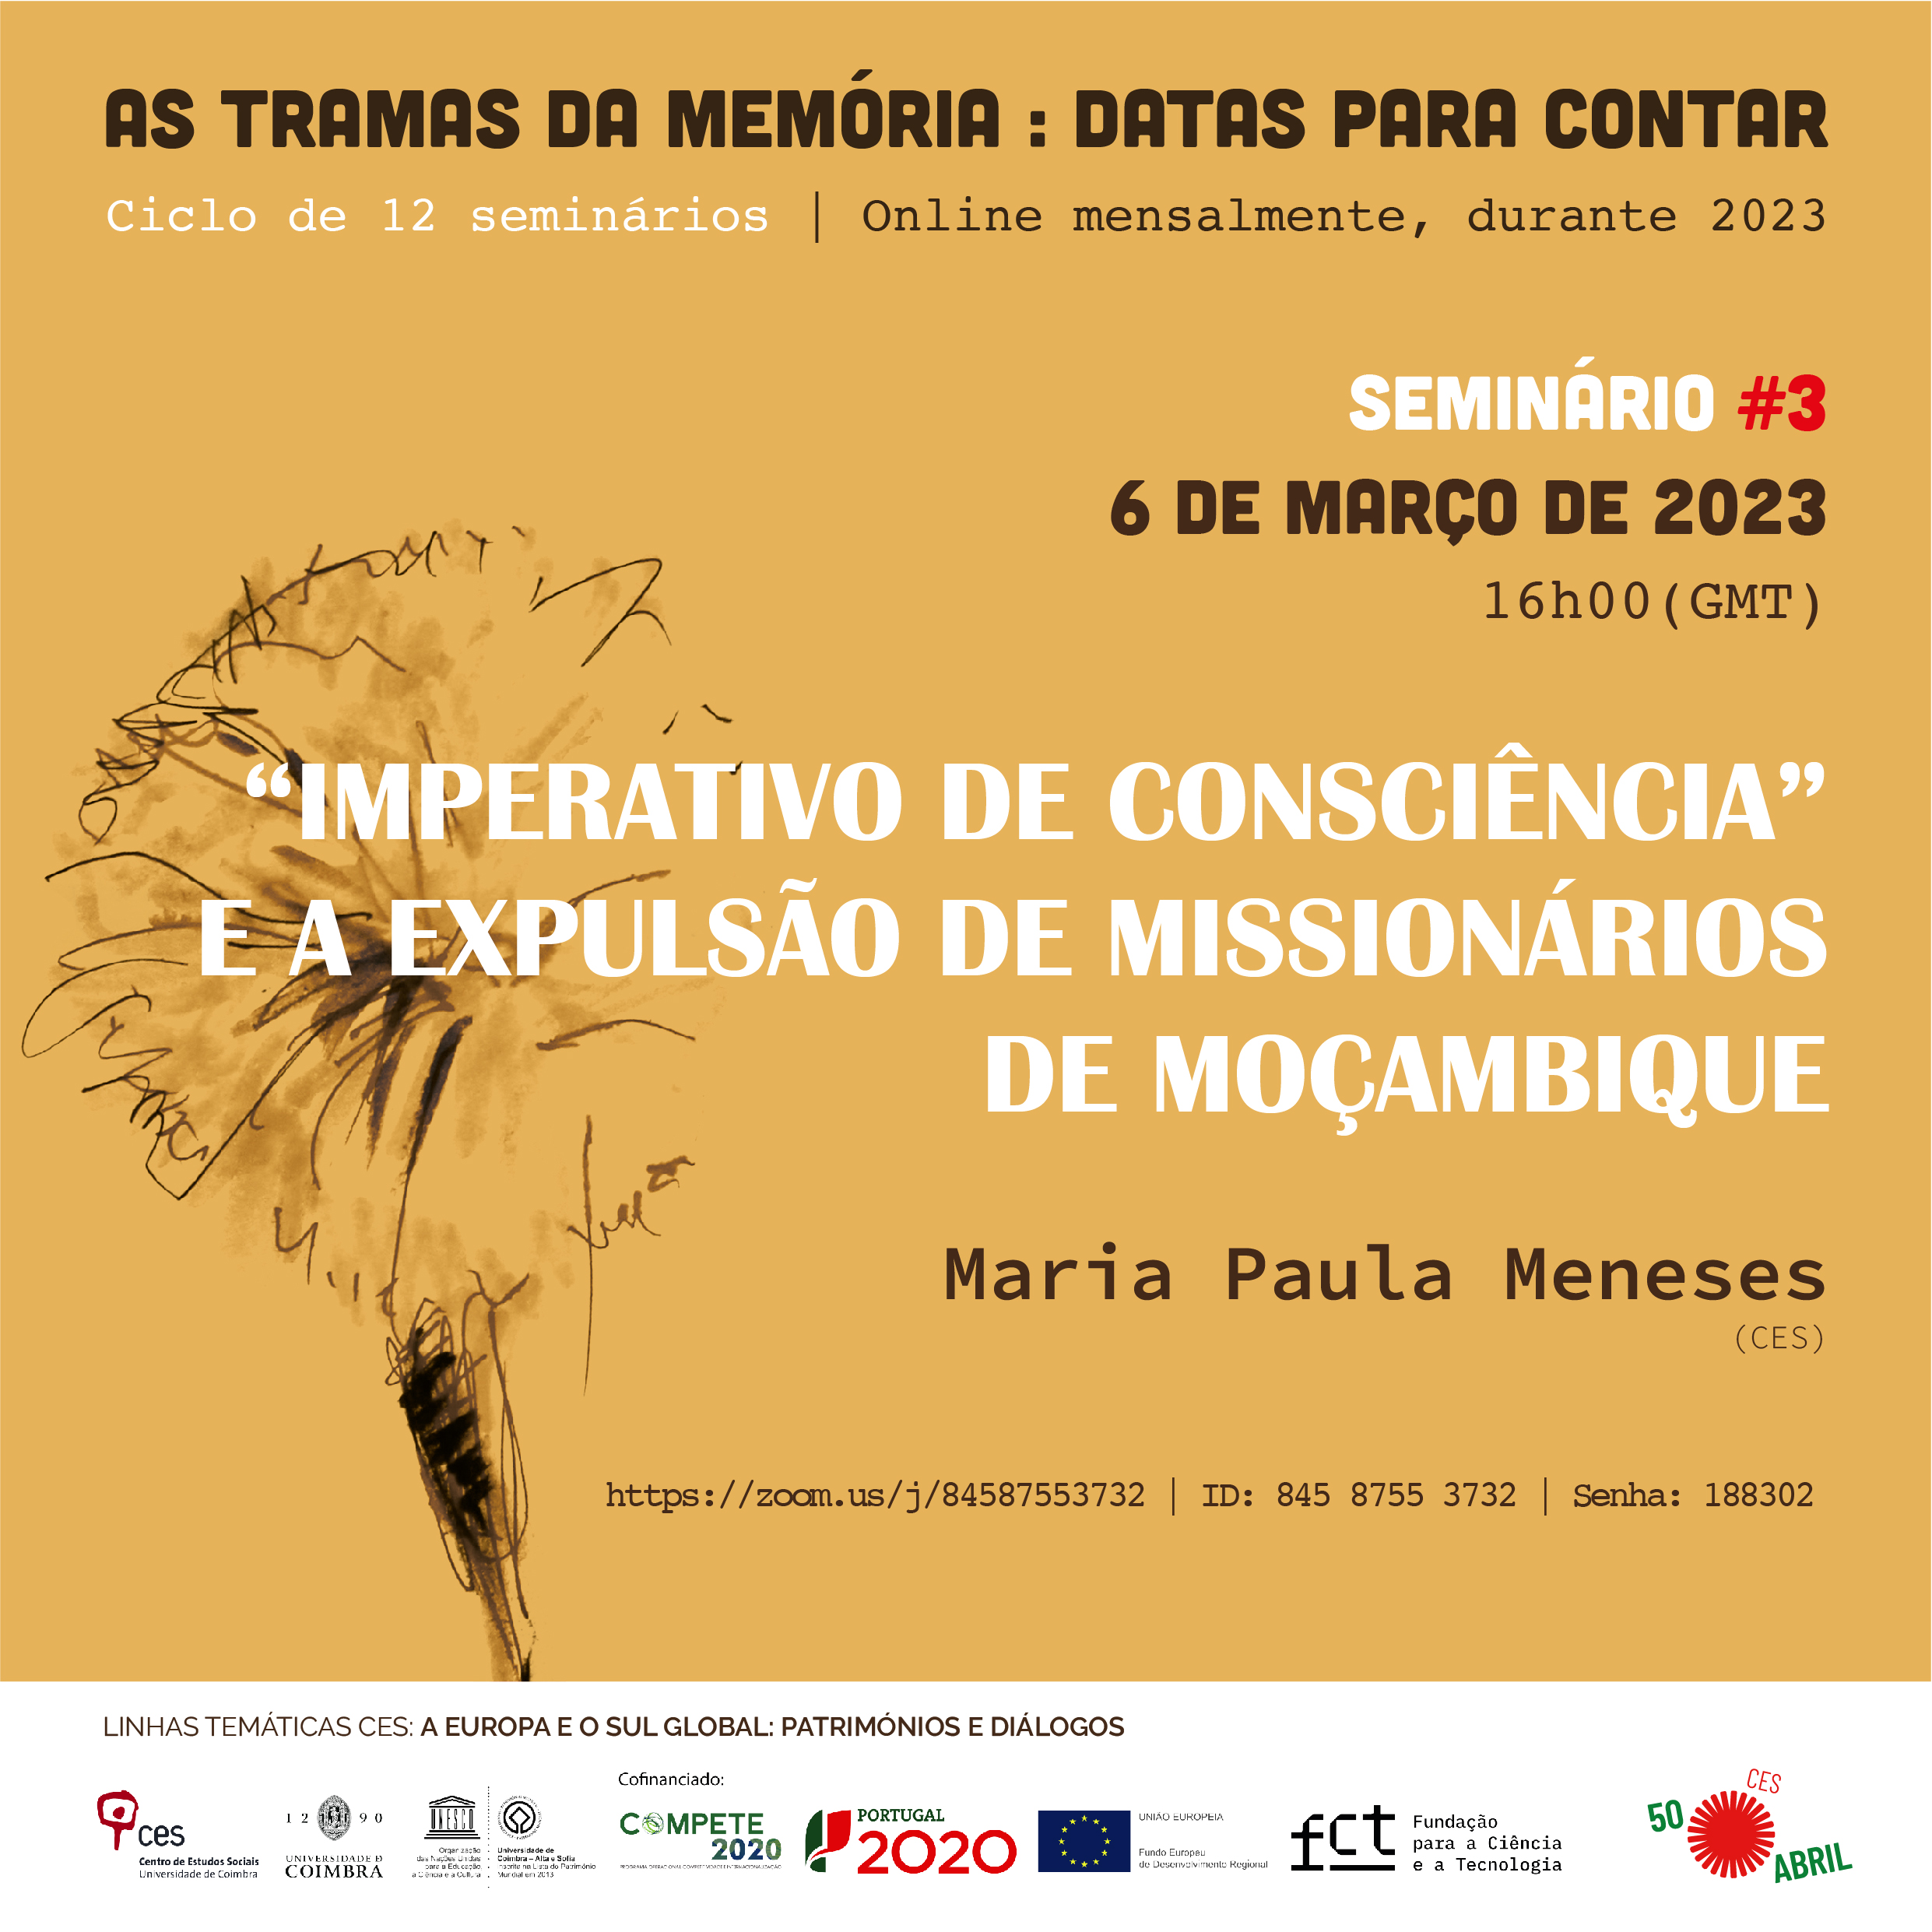 The "Moral Imperative" and the expulsion of missionaries from Mozambique<span id="edit_41729"><script>$(function() { $('#edit_41729').load( "/myces/user/editobj.php?tipo=evento&id=41729" ); });</script></span>